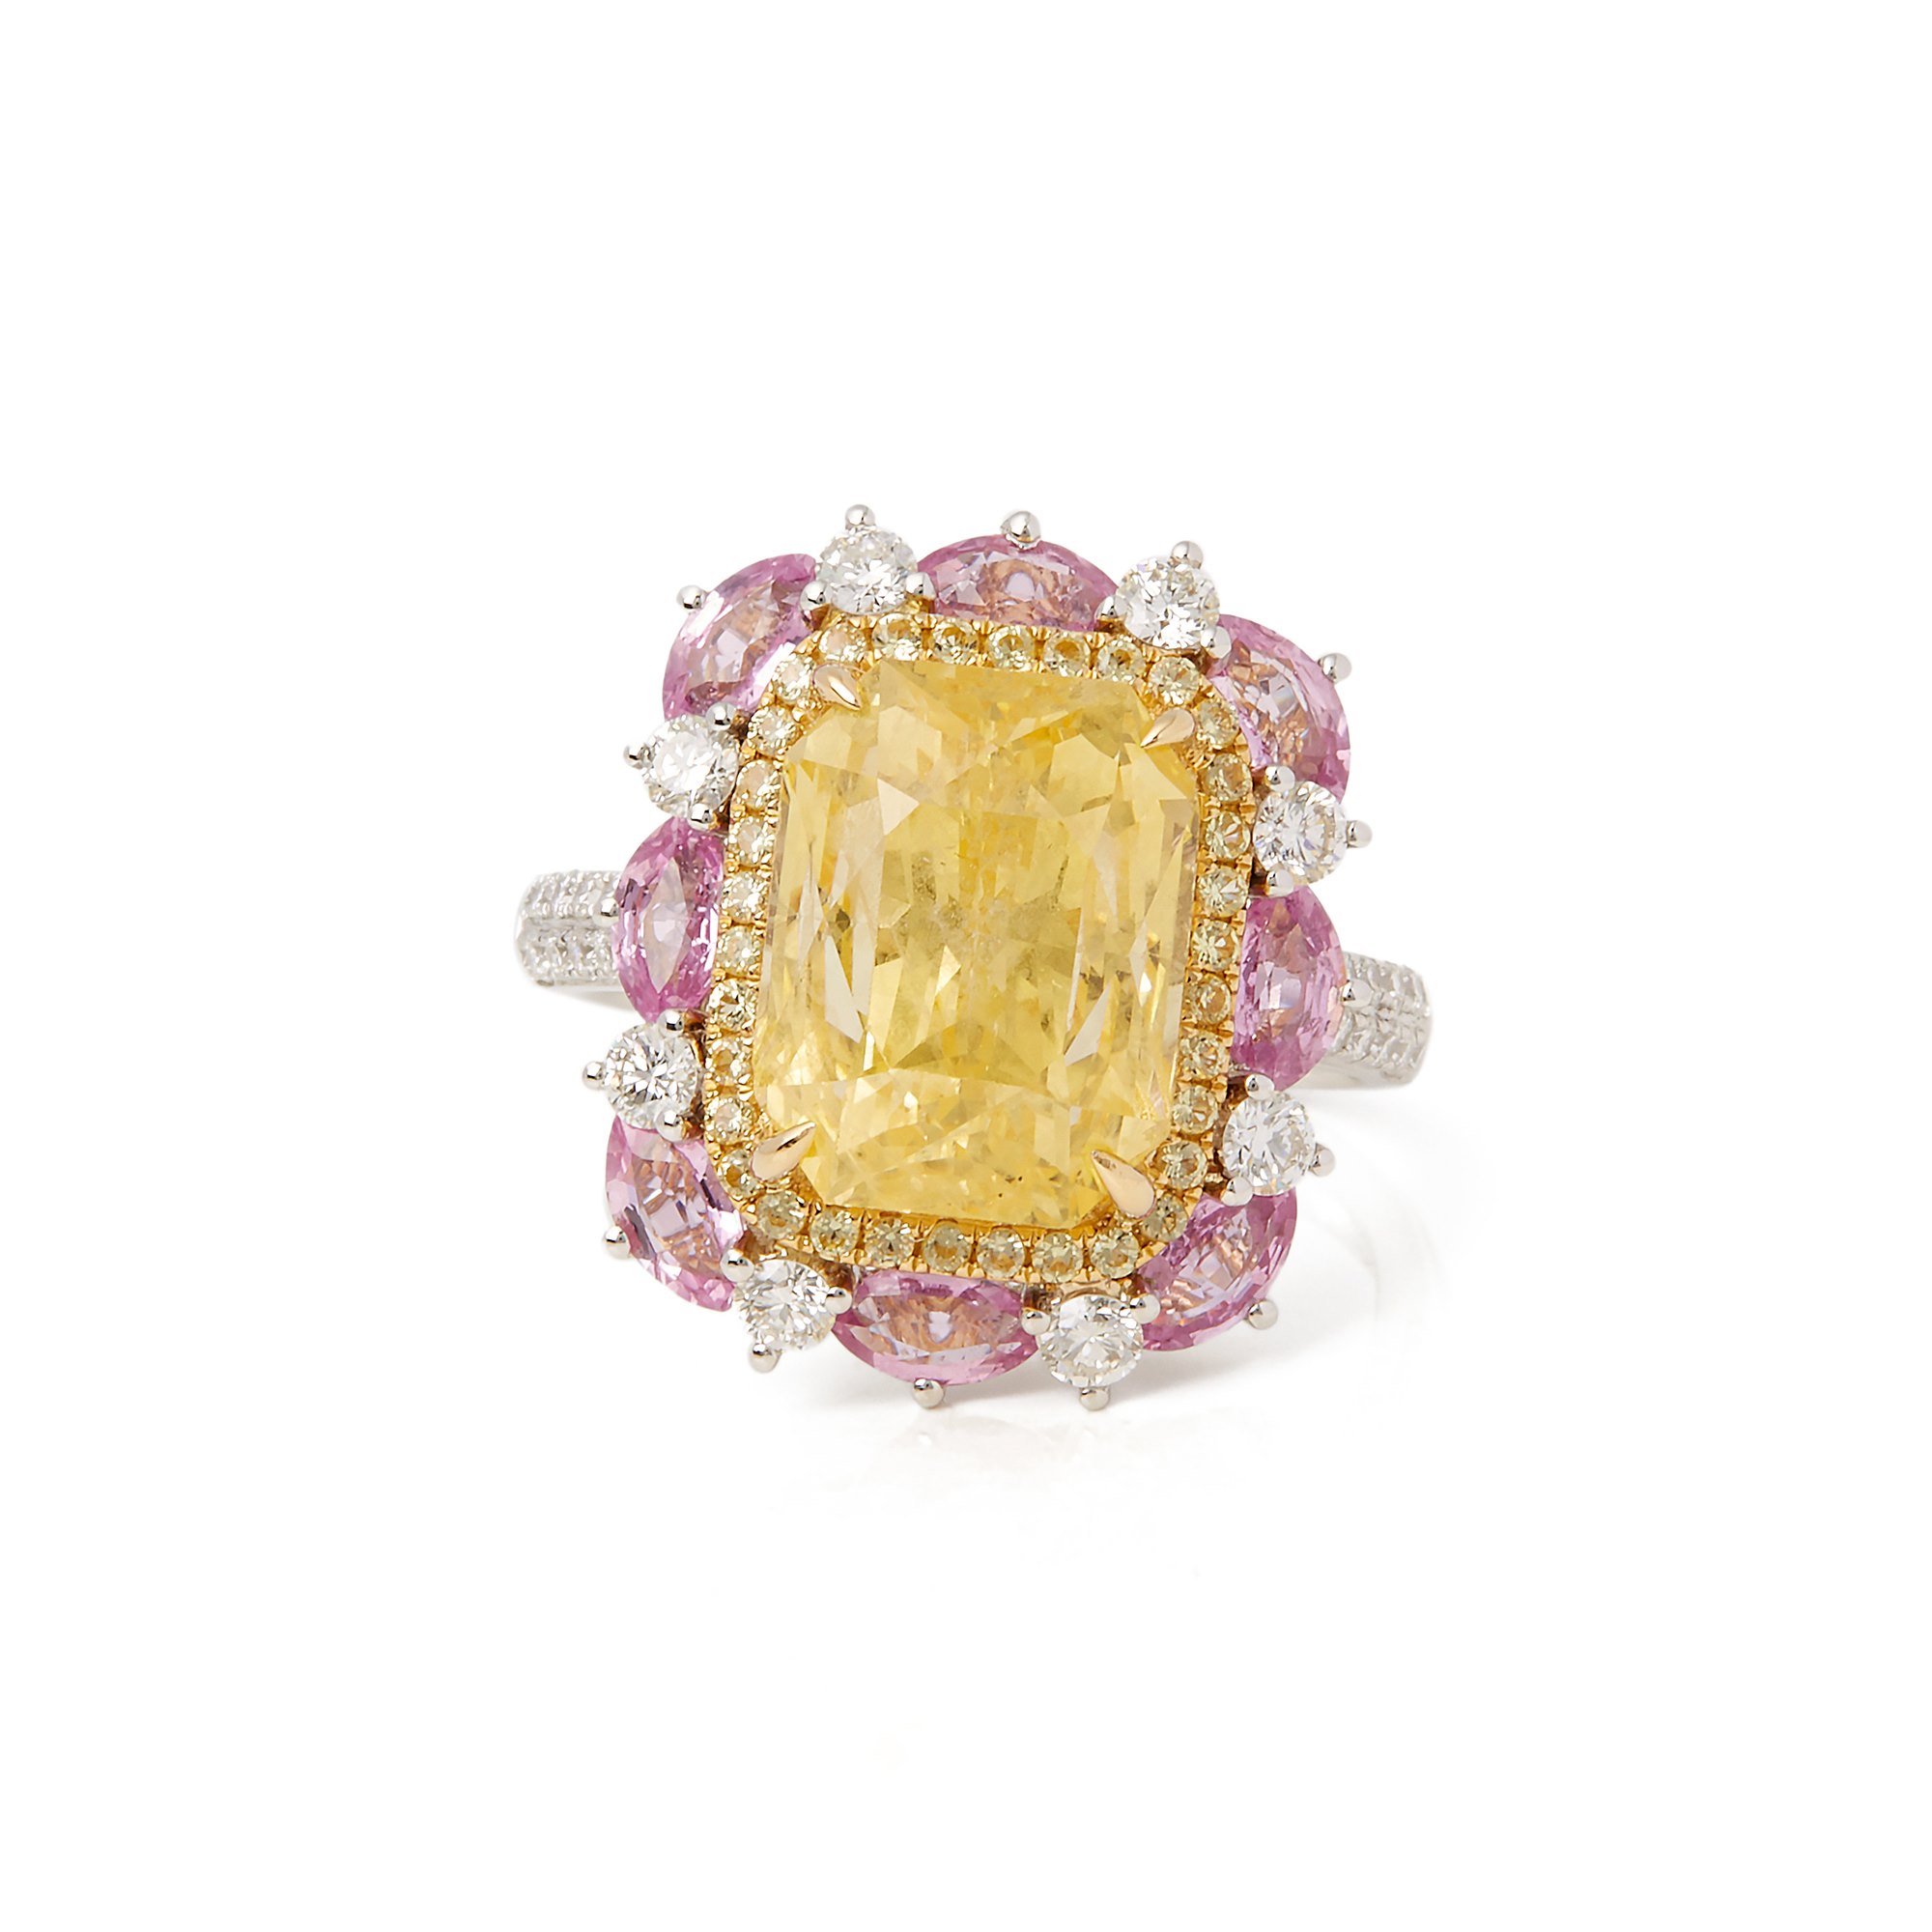 David Jerome 18ct White Gold Yellow Sapphire, Diamond and Pink Sapphire Cluster Ring